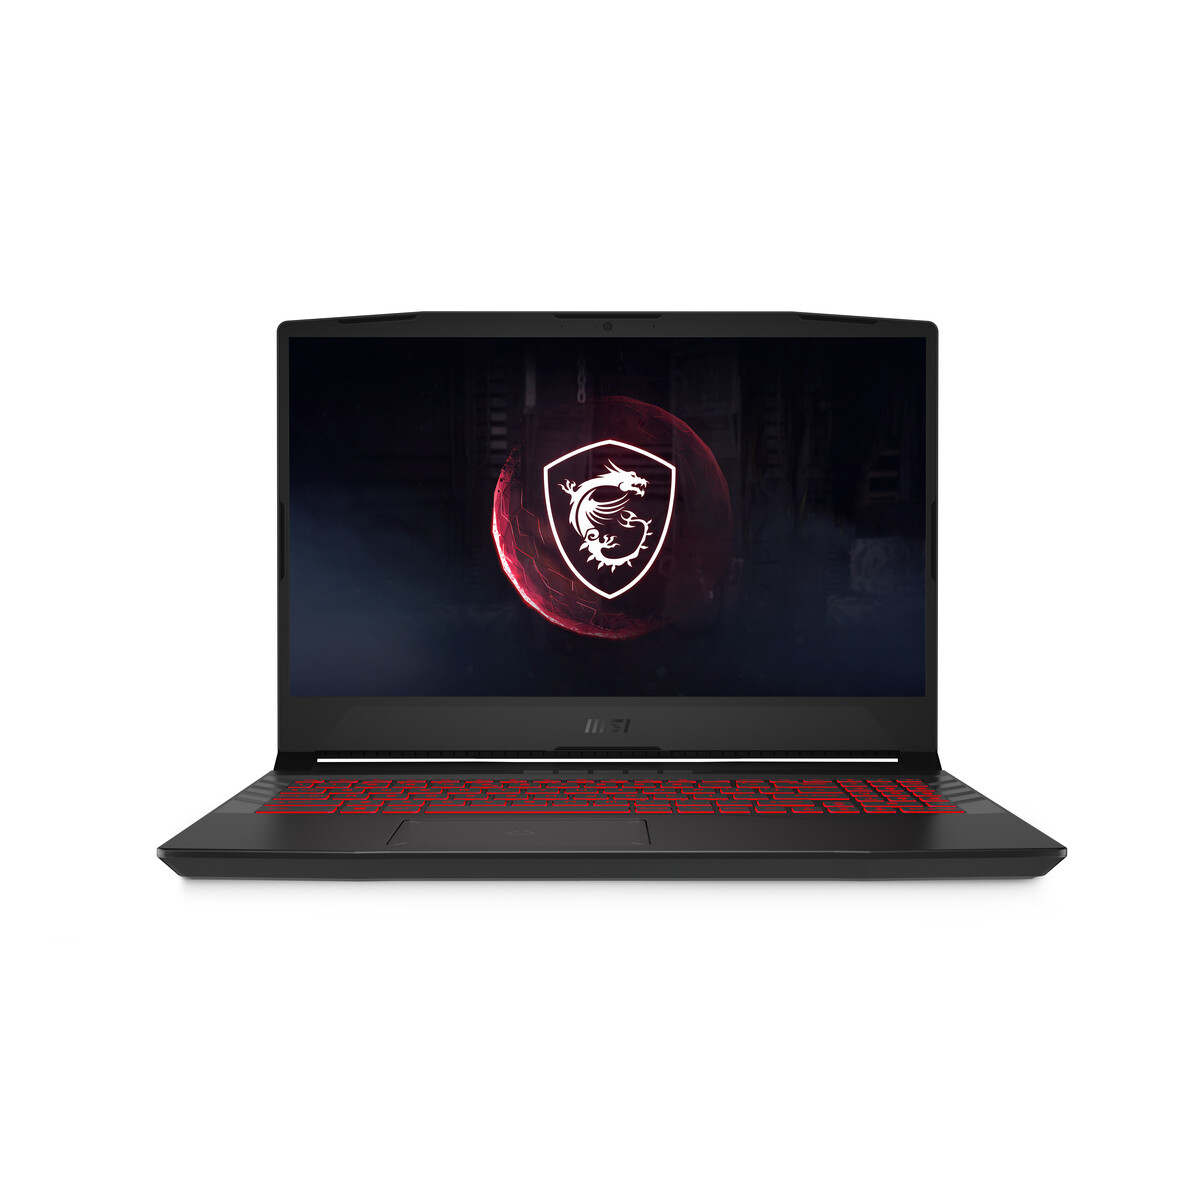 MSI Pulse GL66 gaming laptop is now official with new Intel Tiger Lake-H  processors - NotebookCheck.net News